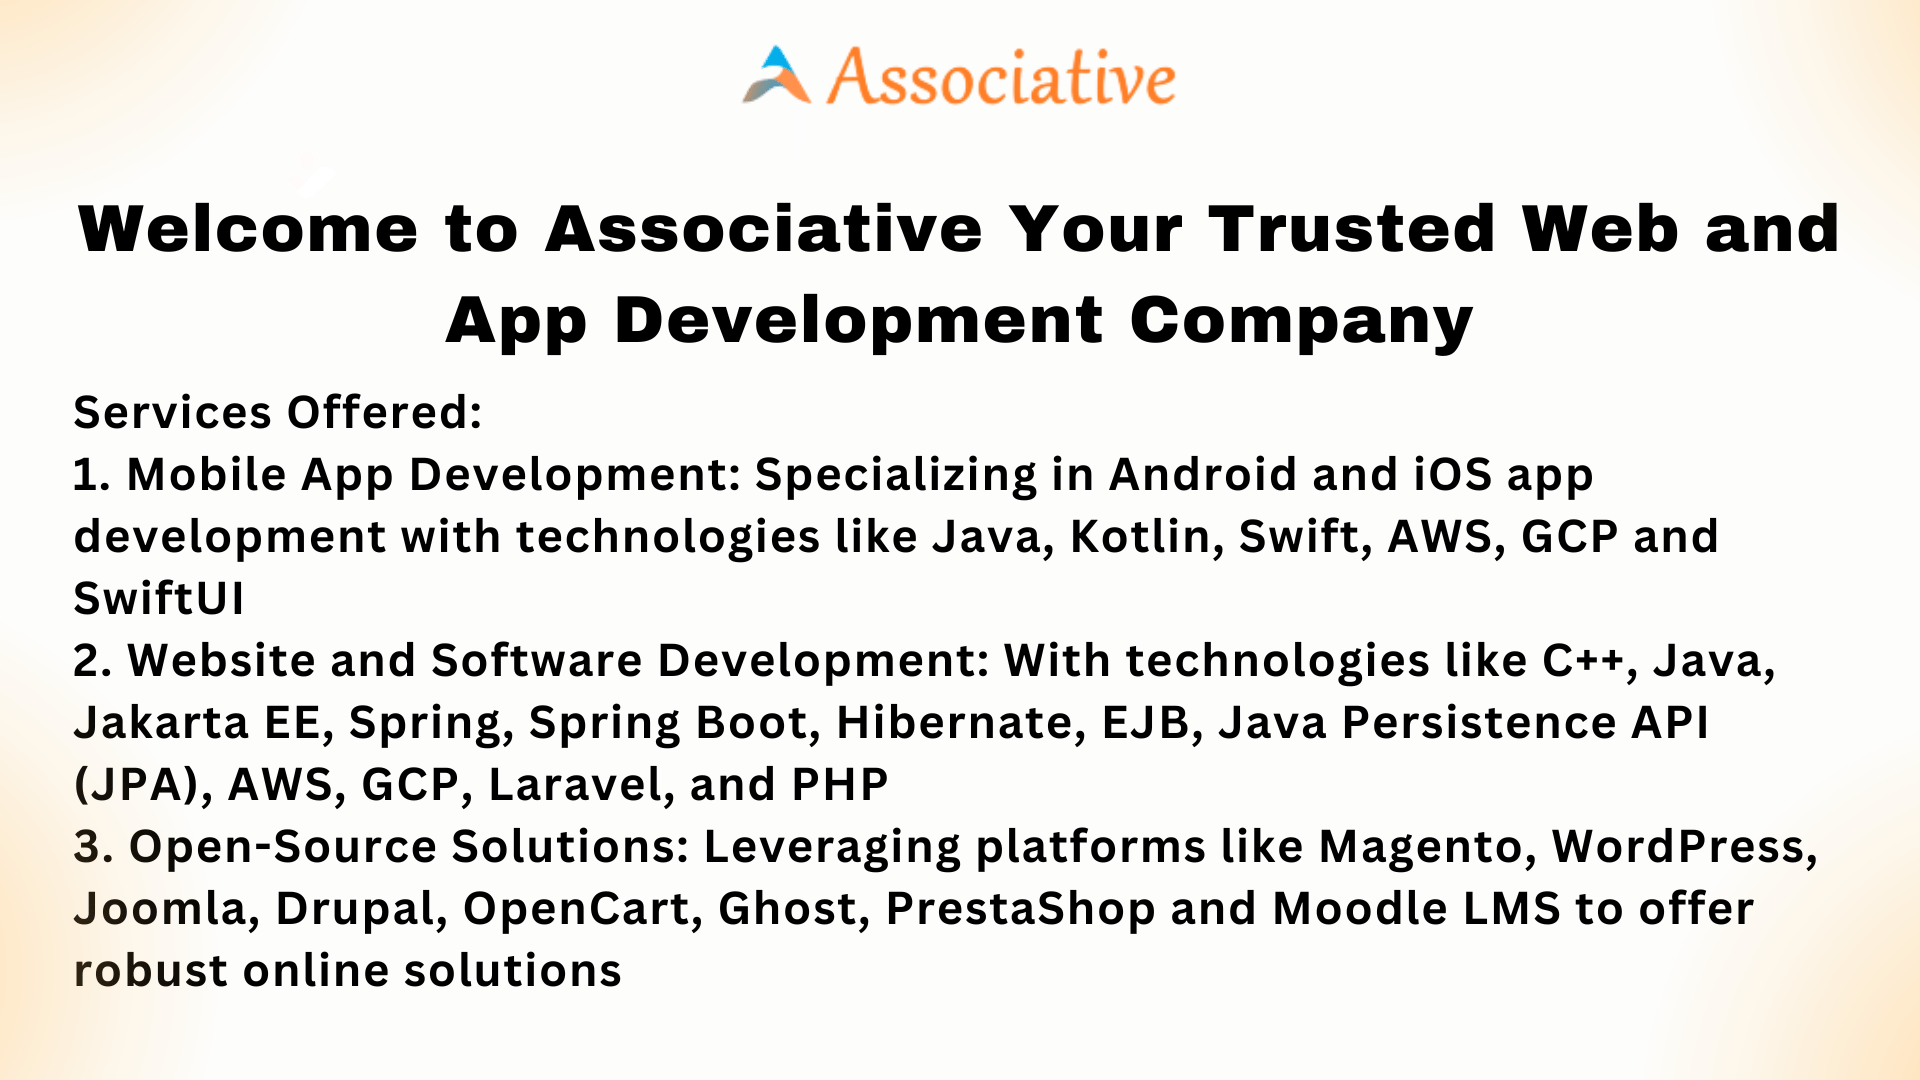 Welcome to Associative Your Trusted Web and App Development Company